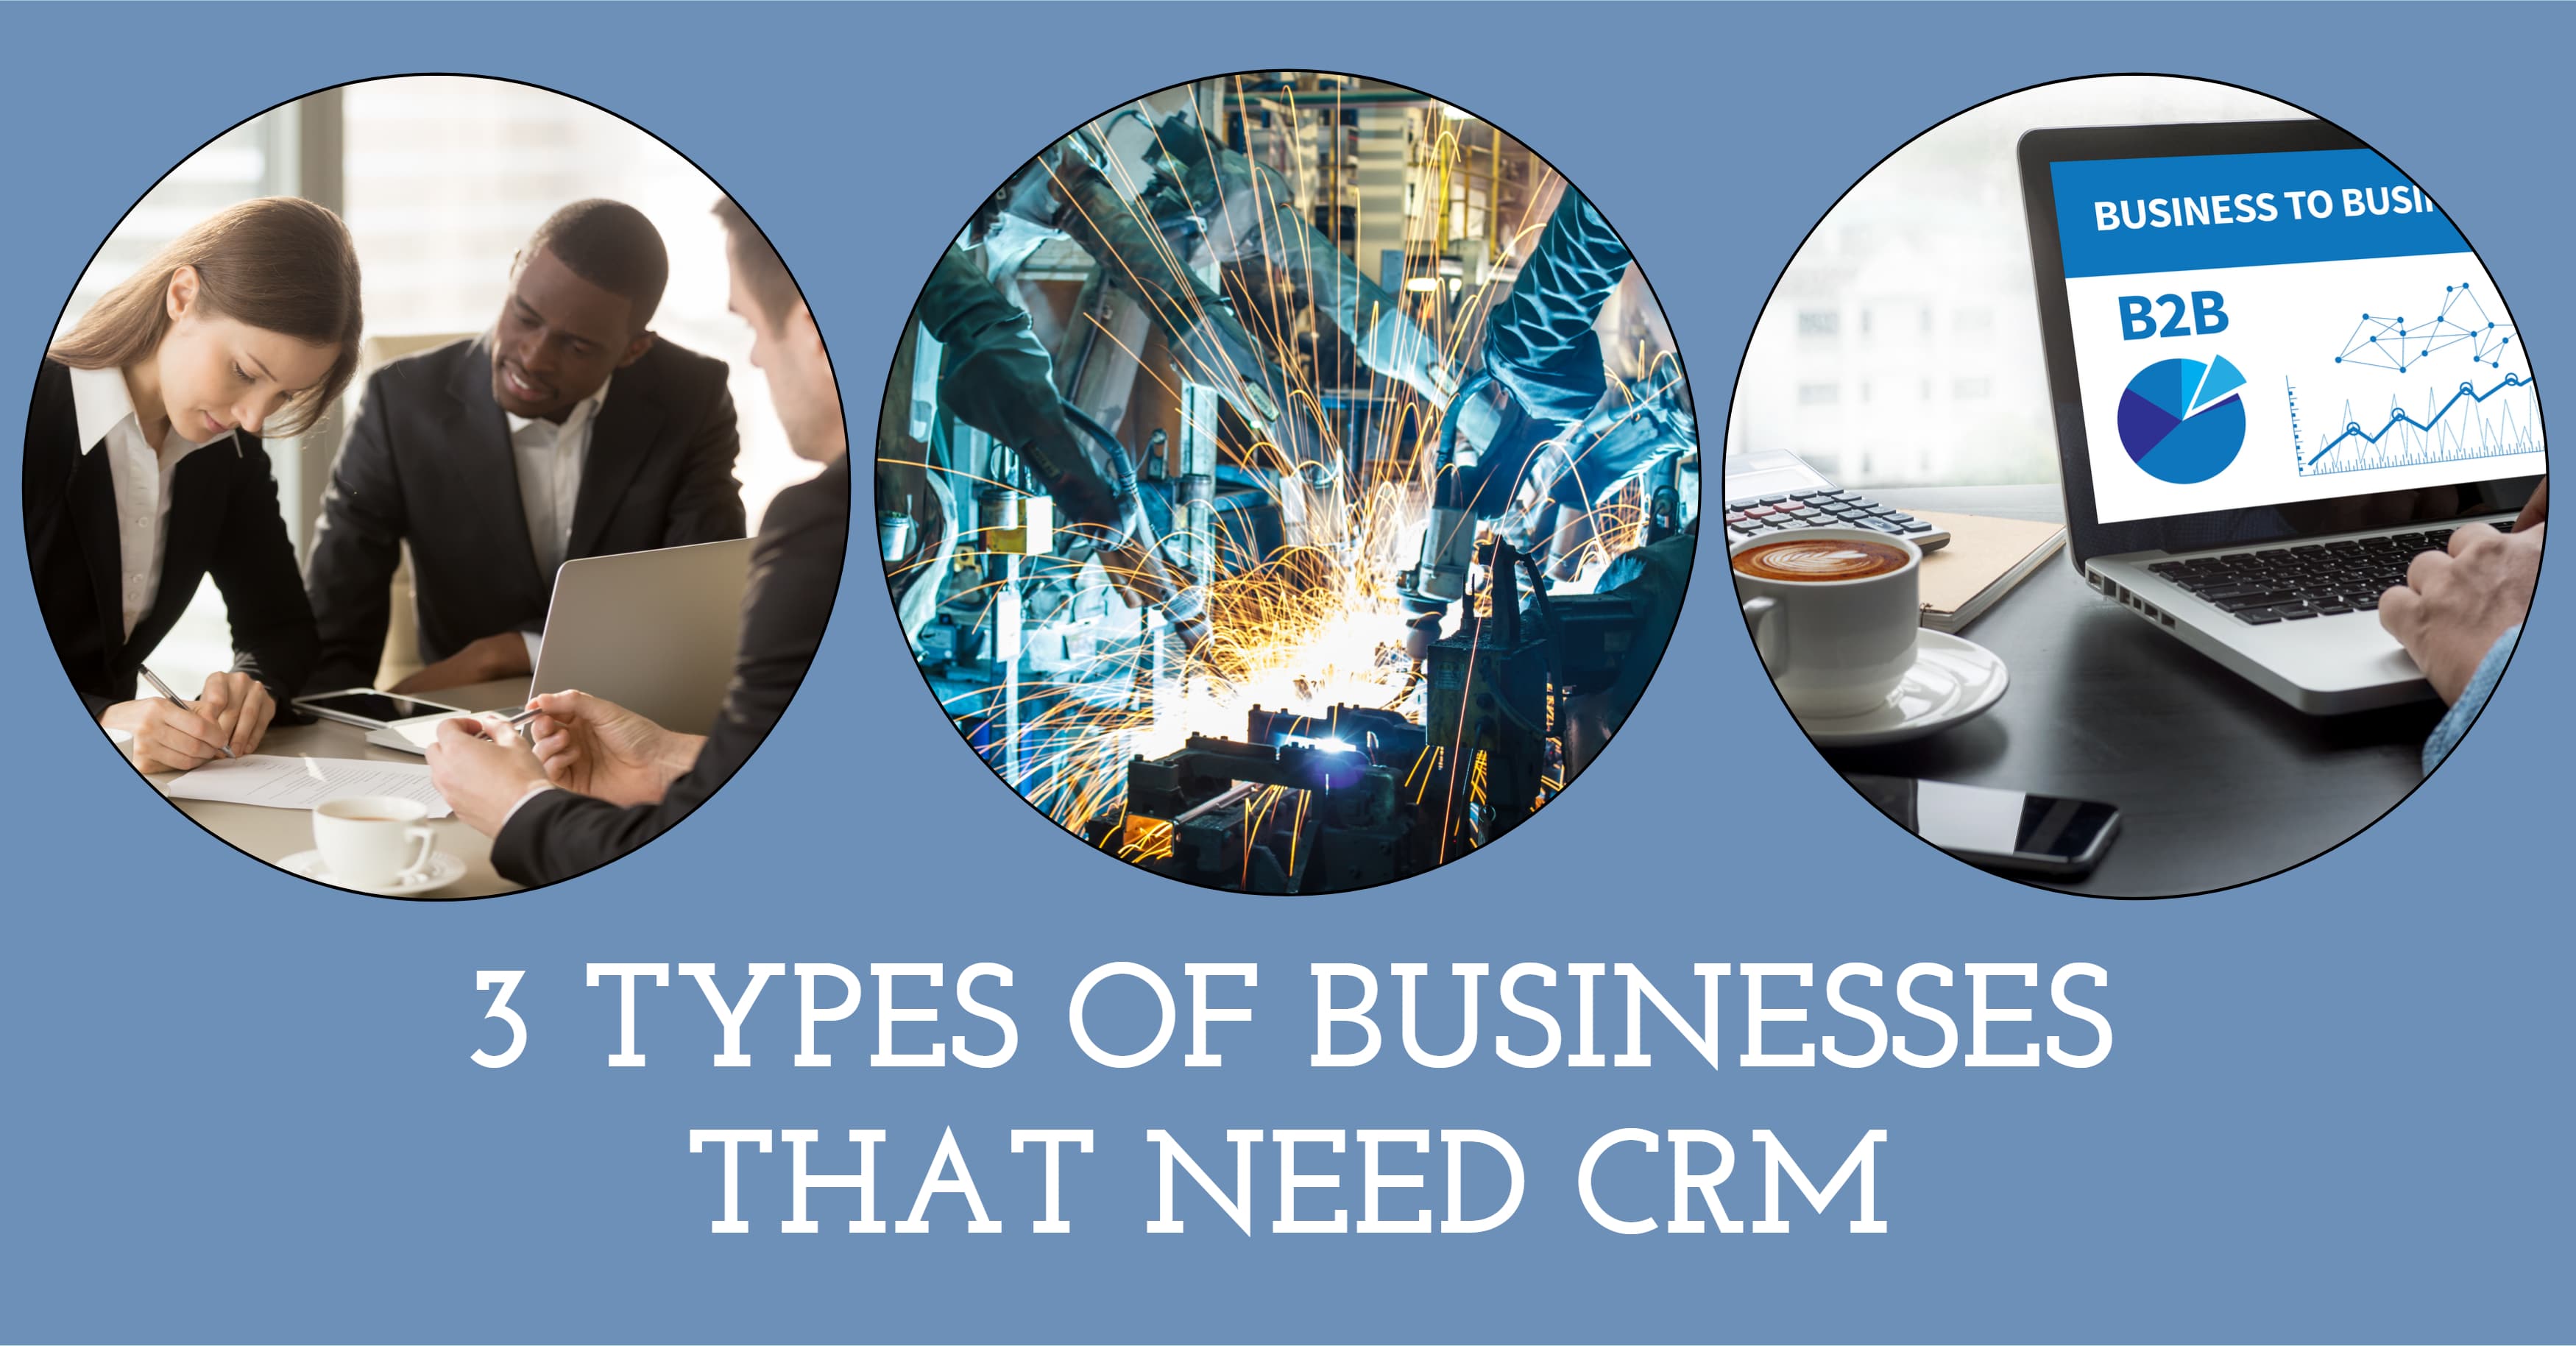 Businesses Need CRM